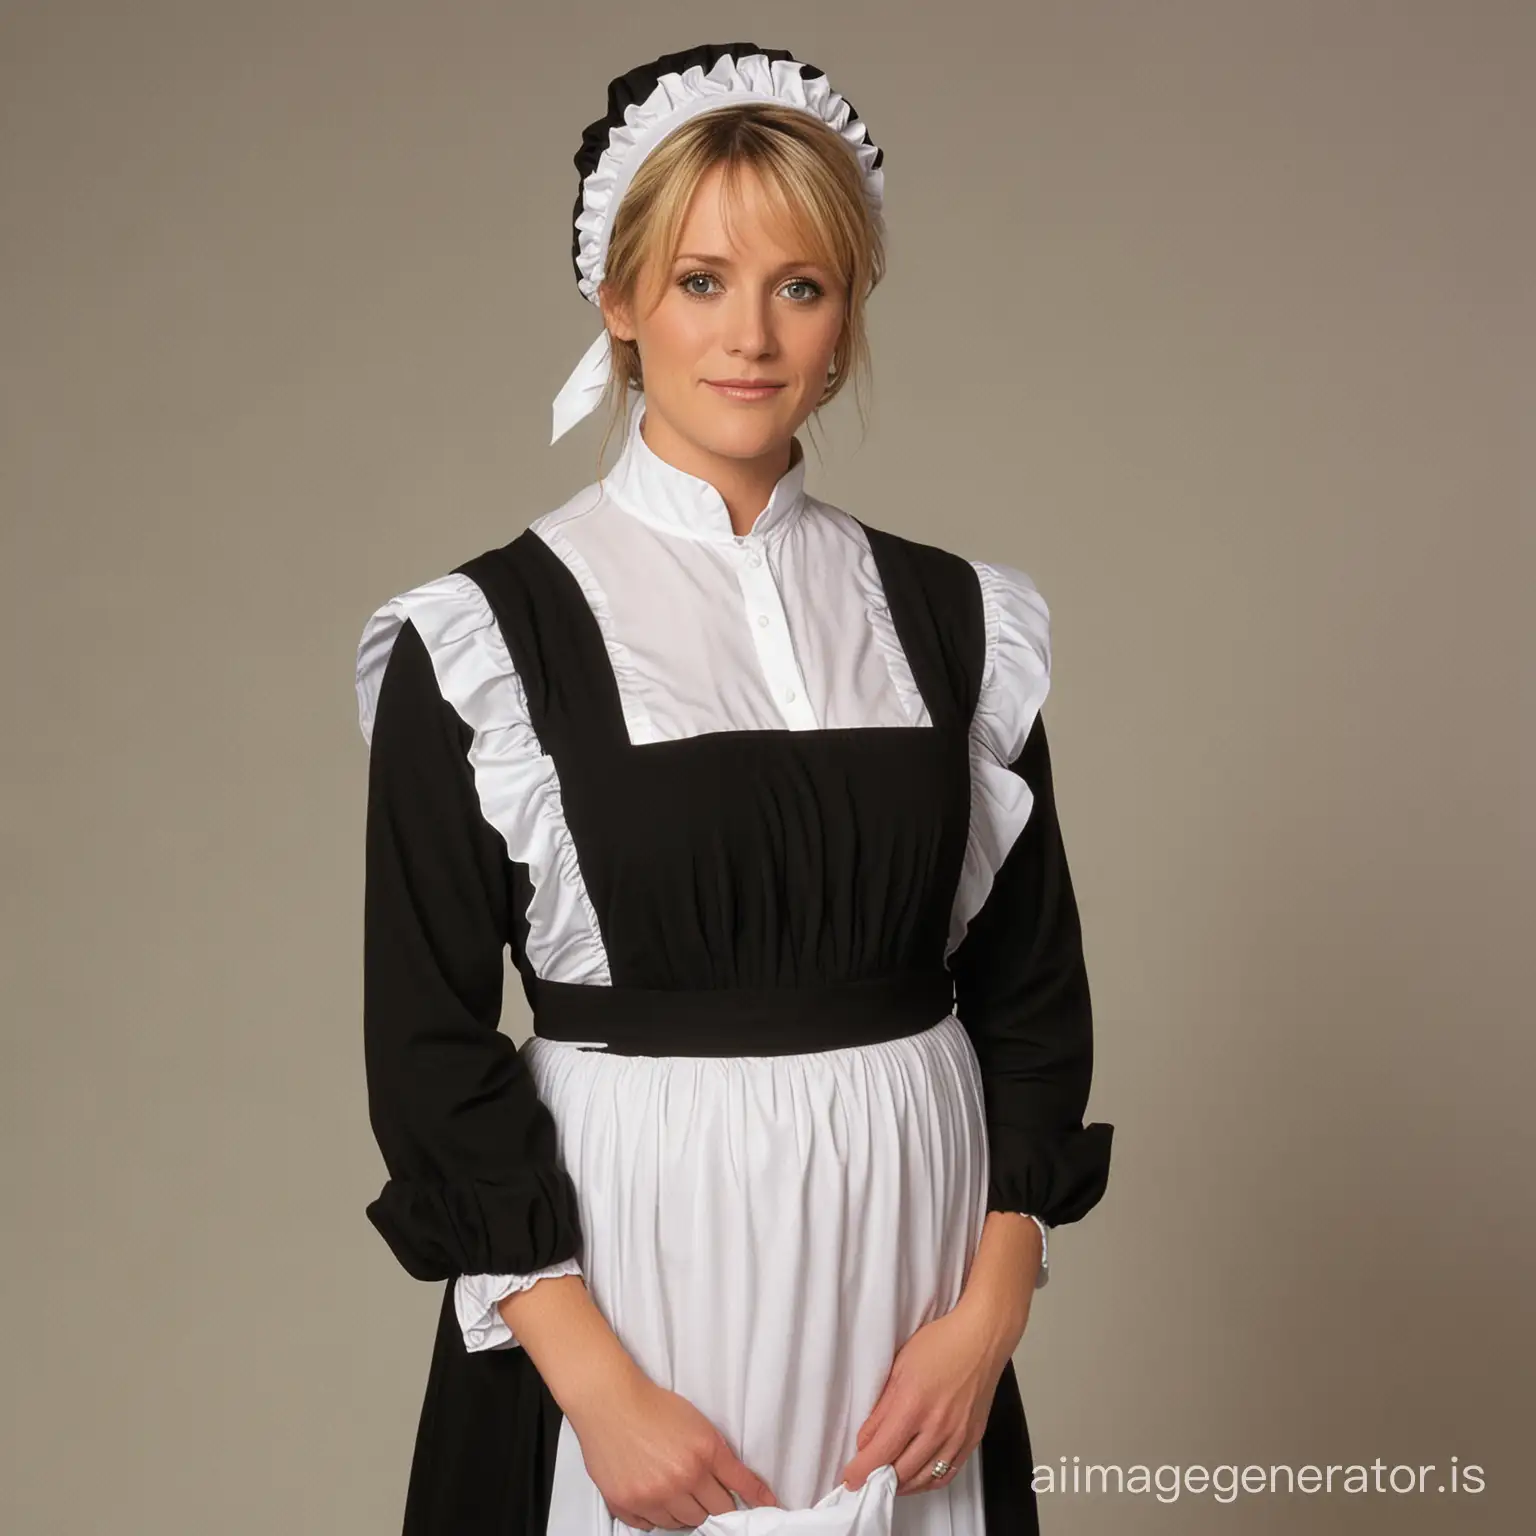 Pregnant Samantha Carter dressed in a floor-length black amish dress with a white apron around her waist , her hair covered by a white bonnet